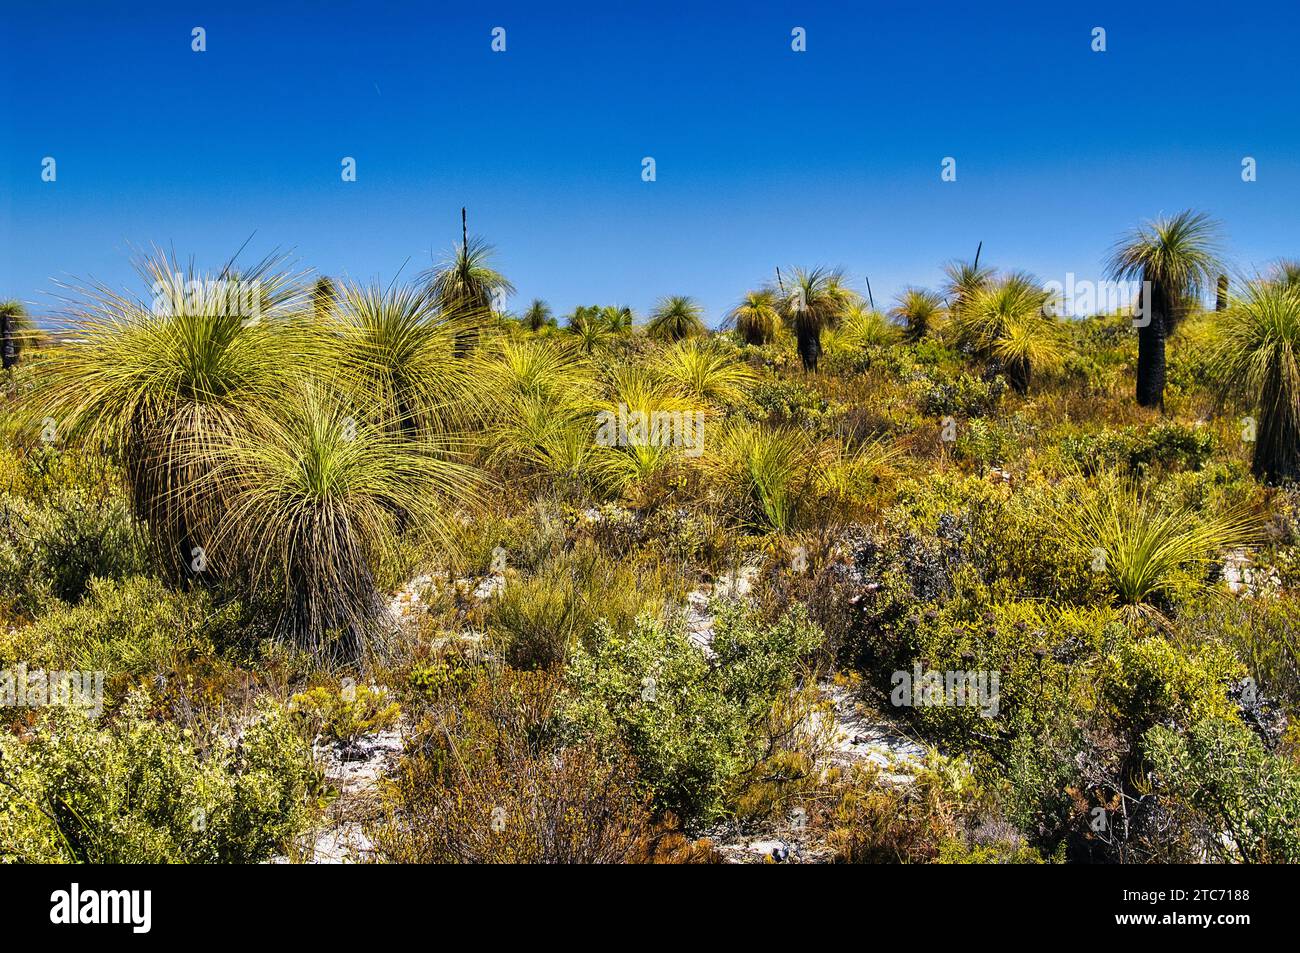 Grass trees and coastal dune vegetation with low shrubs in Lesueur National Park, on the west coast of Western Australia Stock Photo